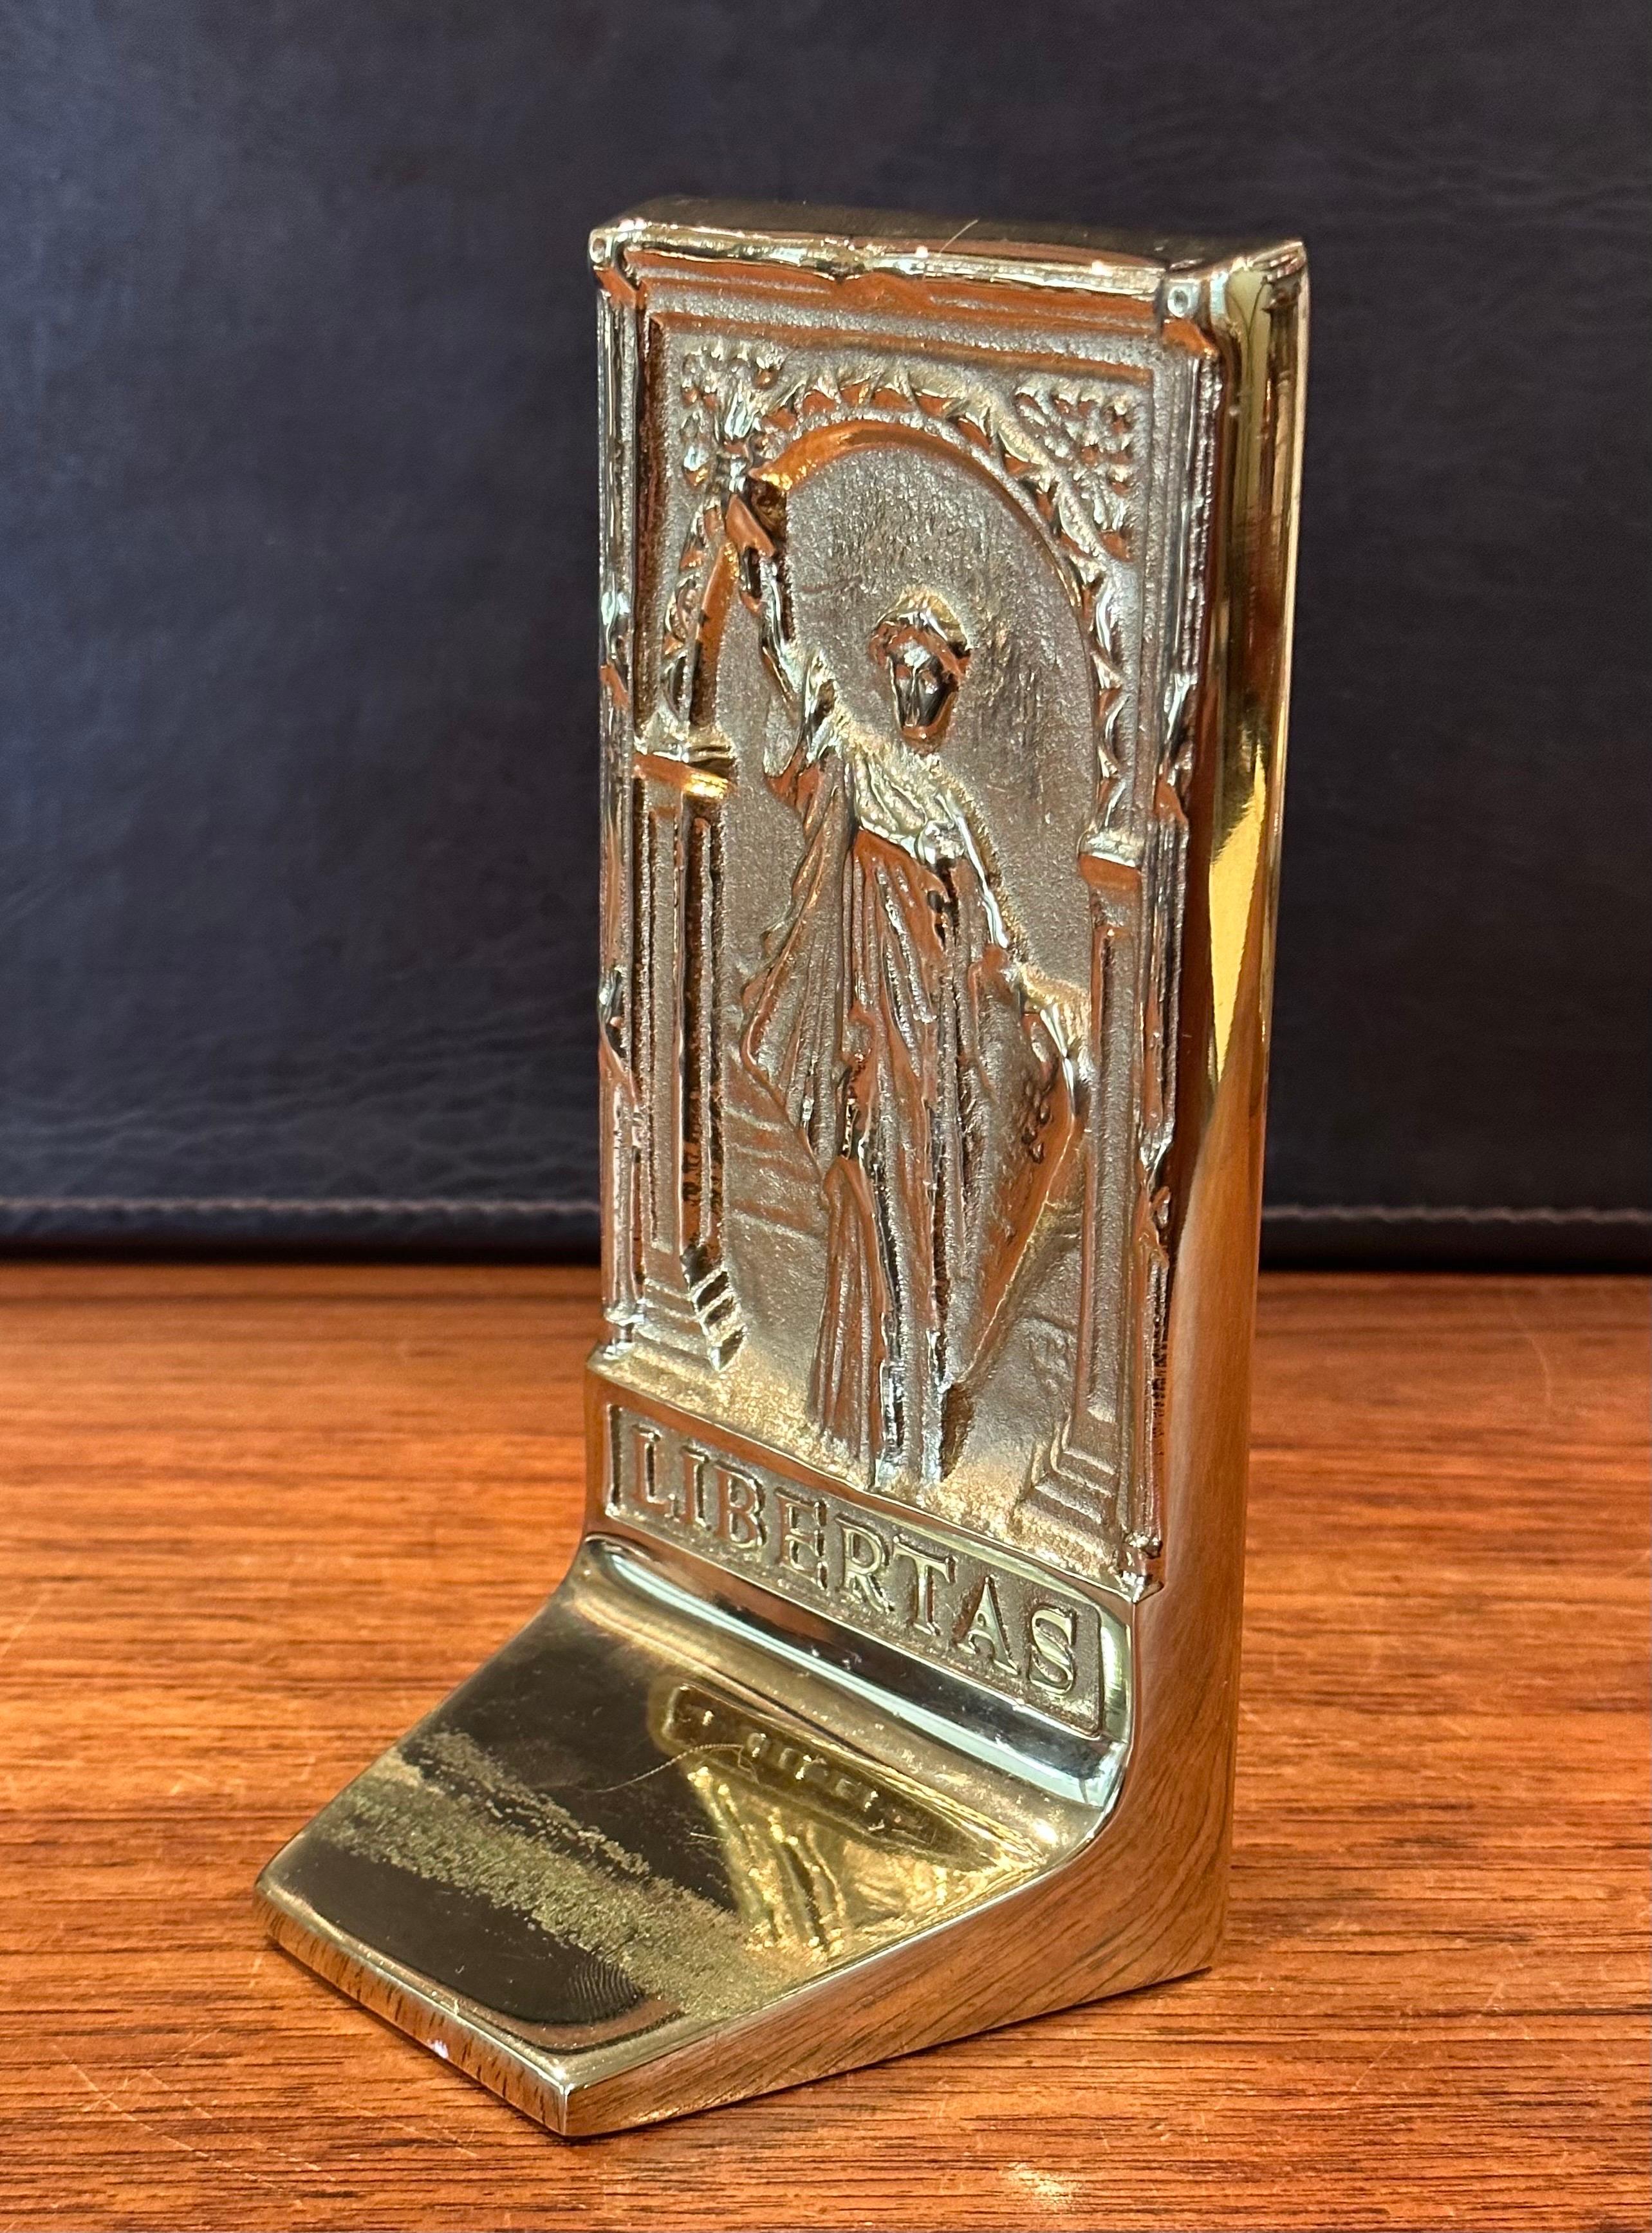 Pair of Rare Solid Brass Libertas & Justitia Bookends by Virginia Metalcrafters For Sale 3